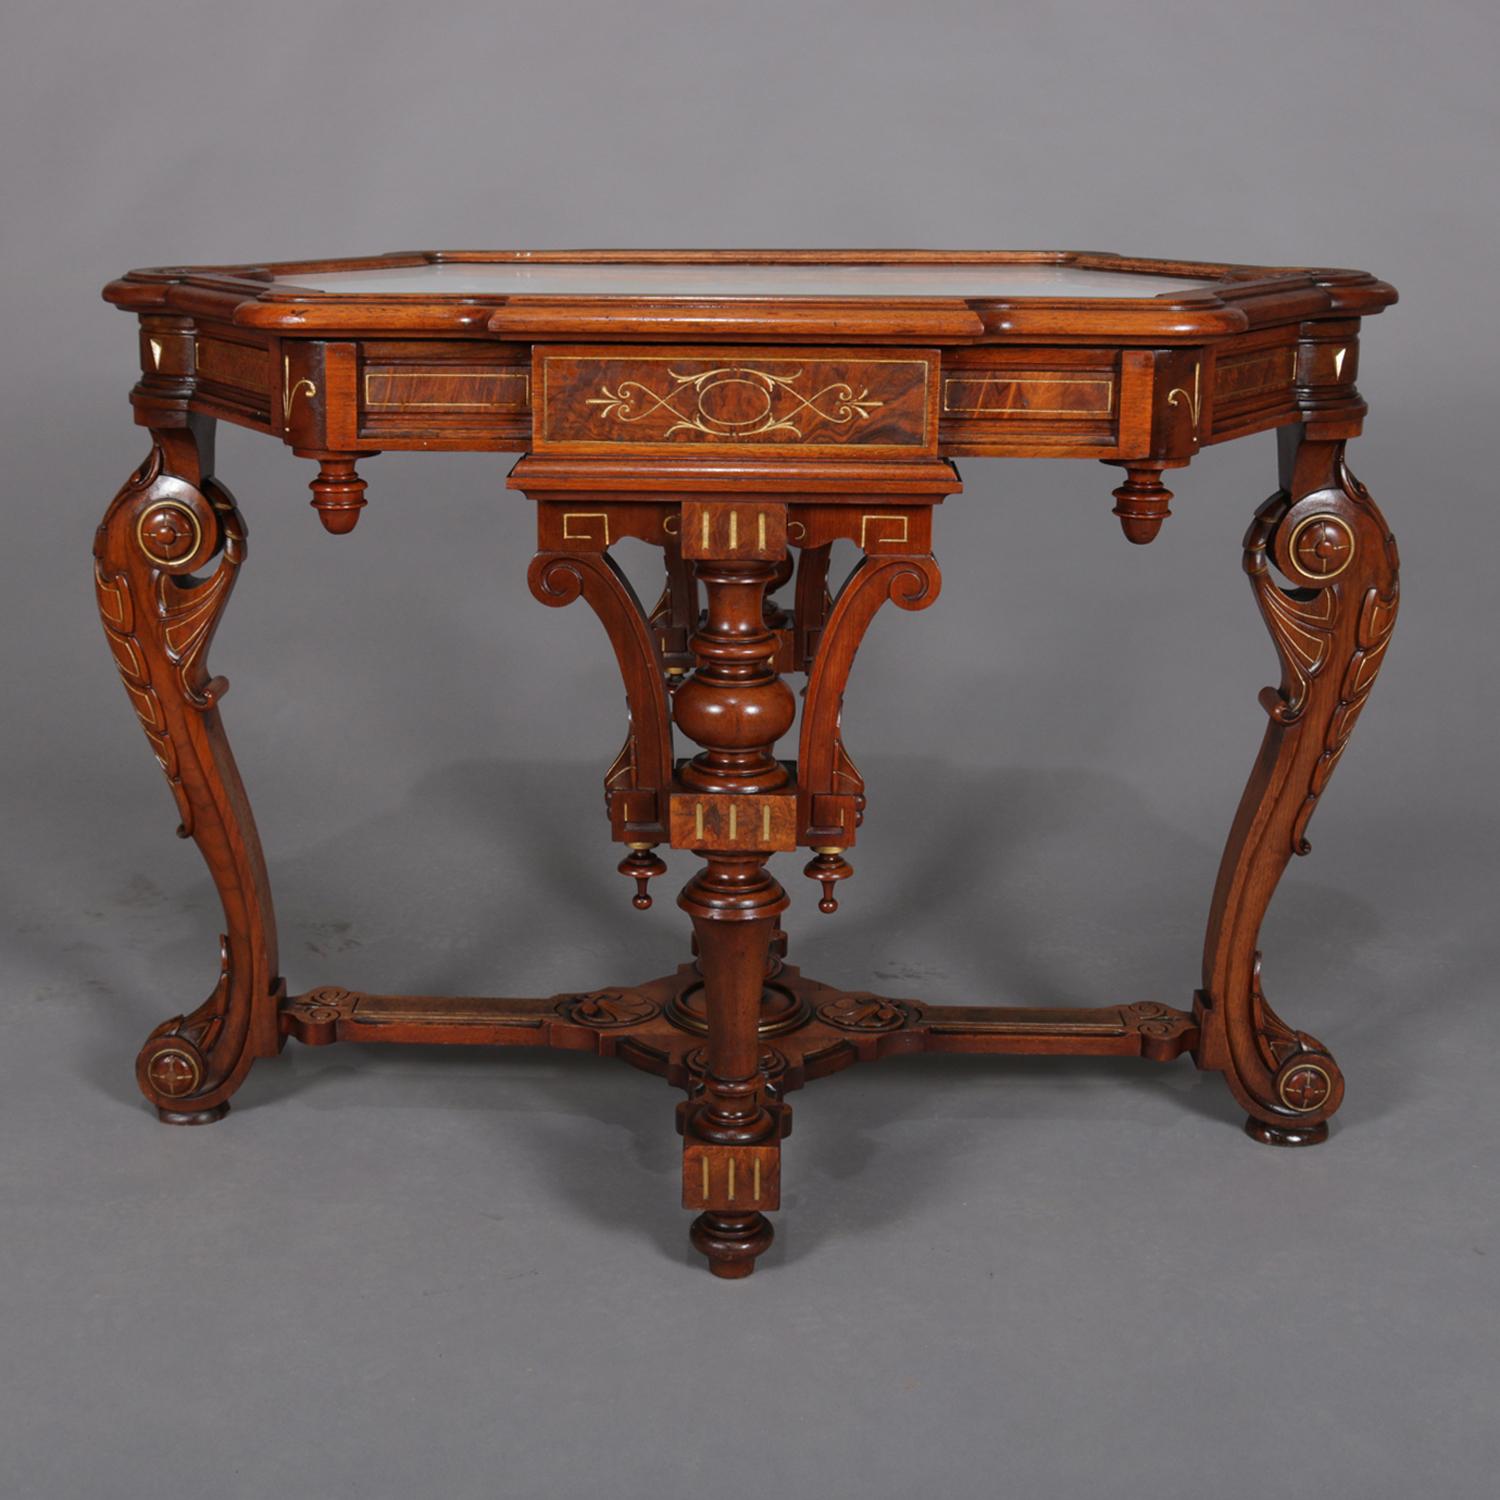 American Antique Neo Greco Carved Walnut, Burl and Gilt Marble-Top Table, circa 1880